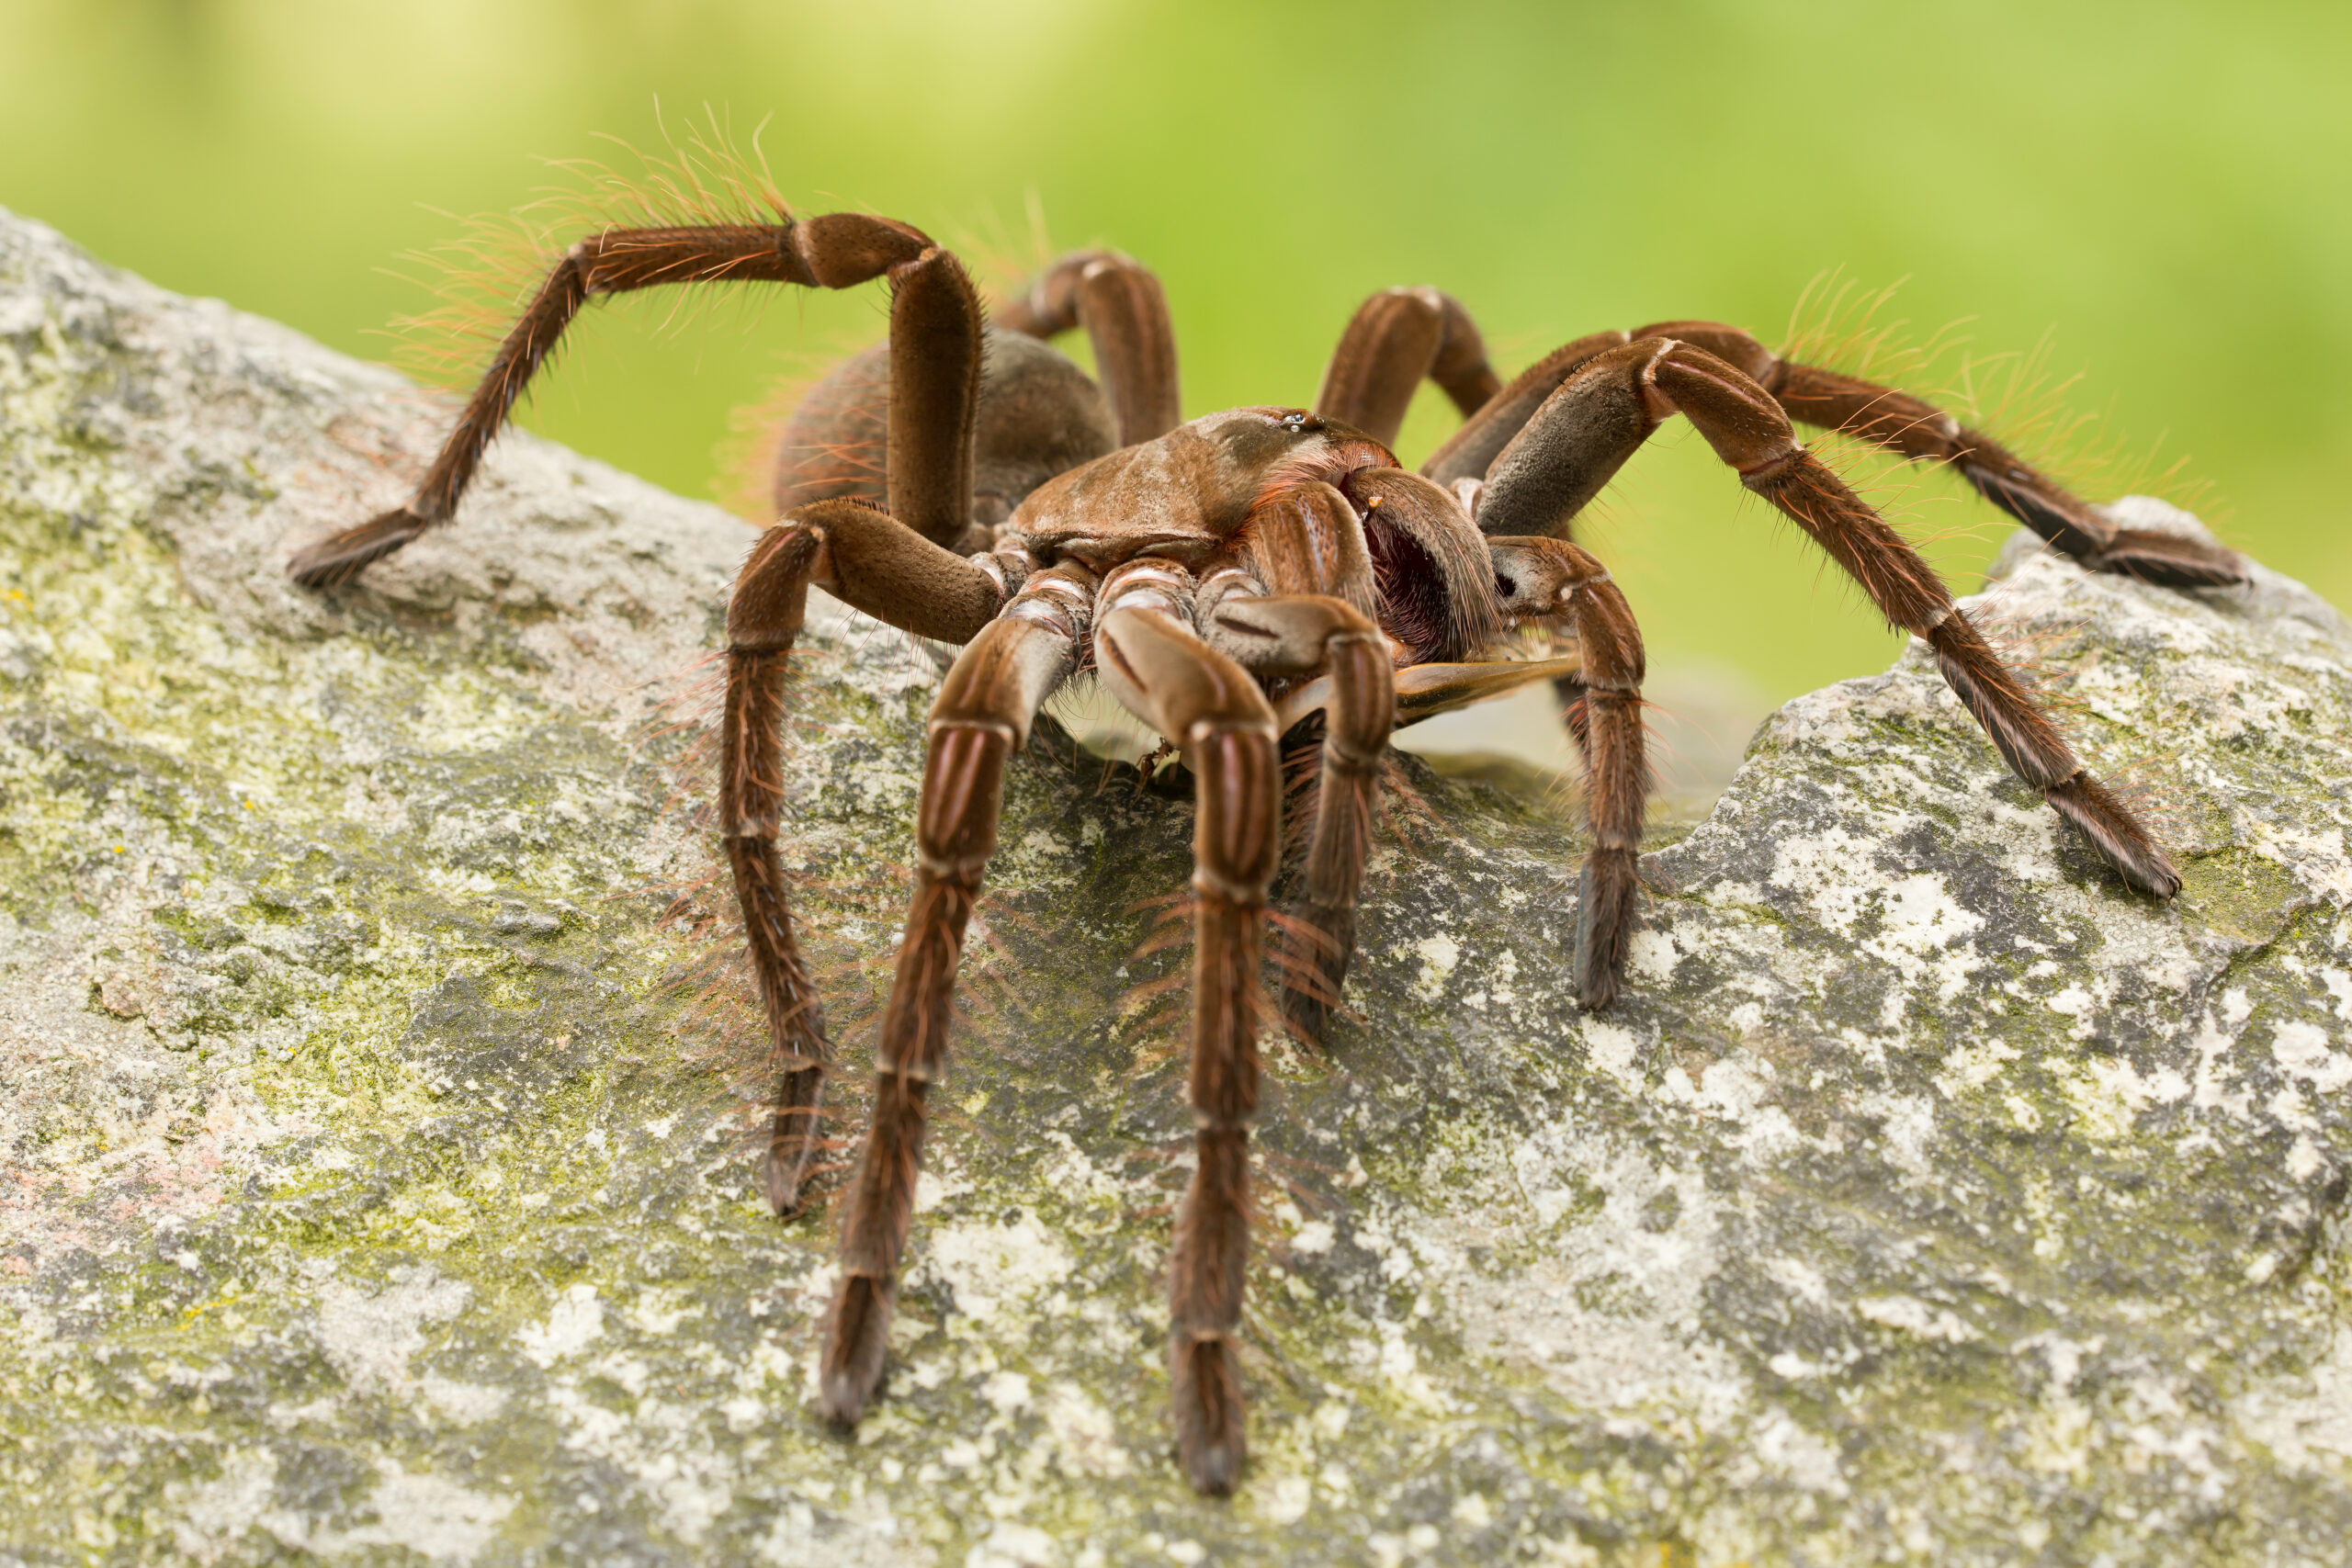 A Goliath Birdeater, scientifically known as Theraphosa blondi, belonging to the tarantula family Theraphosidae. The large spider has a dark brown body with light-colored markings, and its long, hairy legs and two sharp fangs are visible in the image.